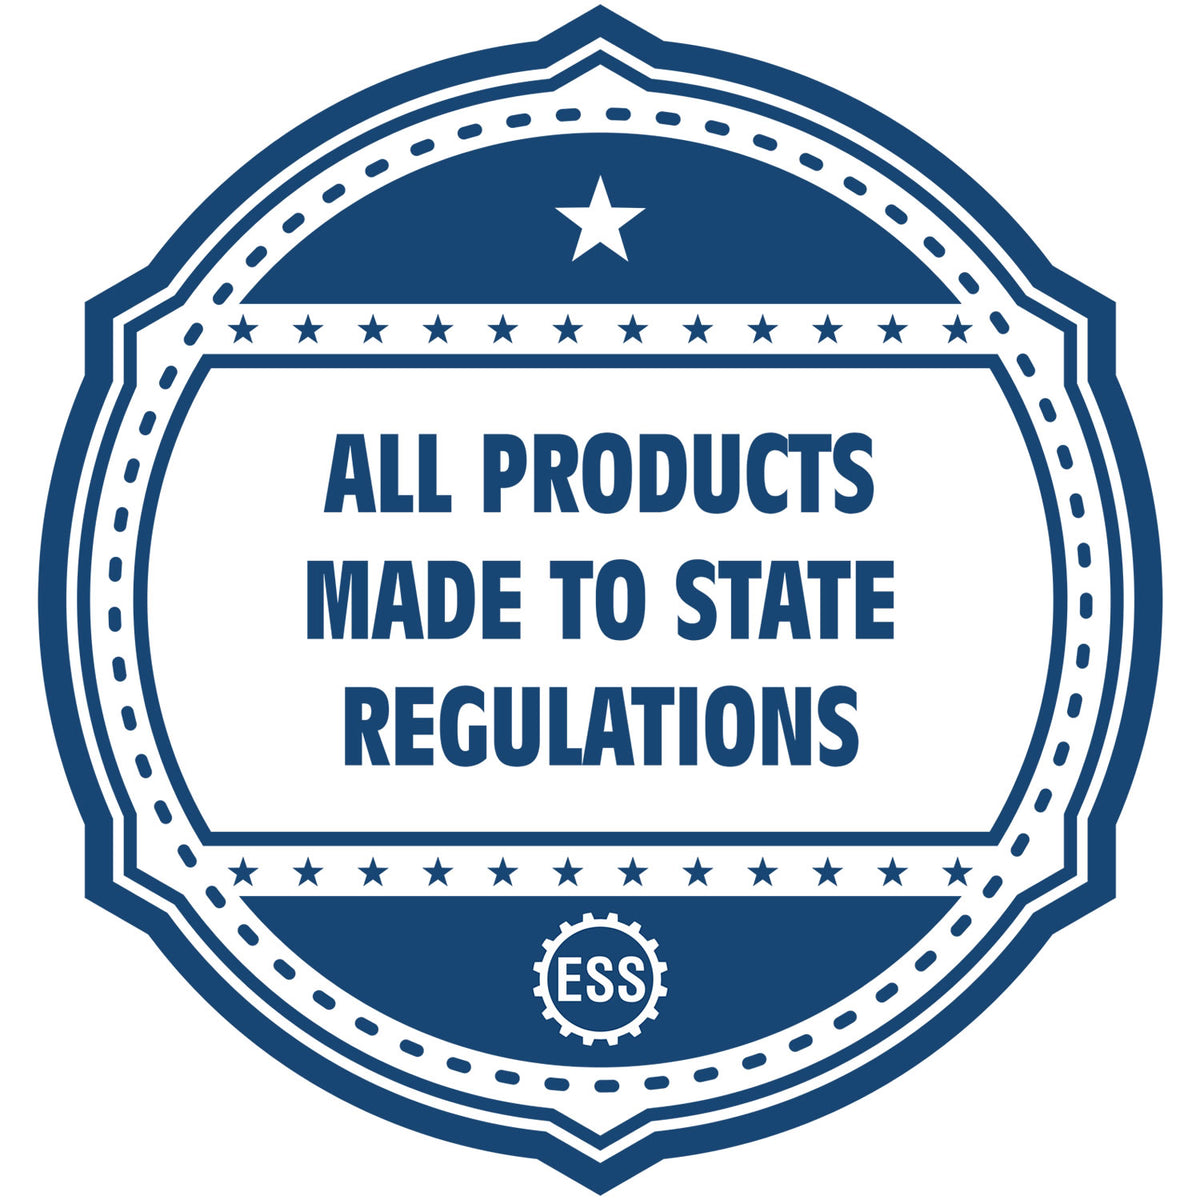 An icon or badge element for the Wooden Handle Utah State Seal Notary Public Stamp showing that this product is made in compliance with state regulations.